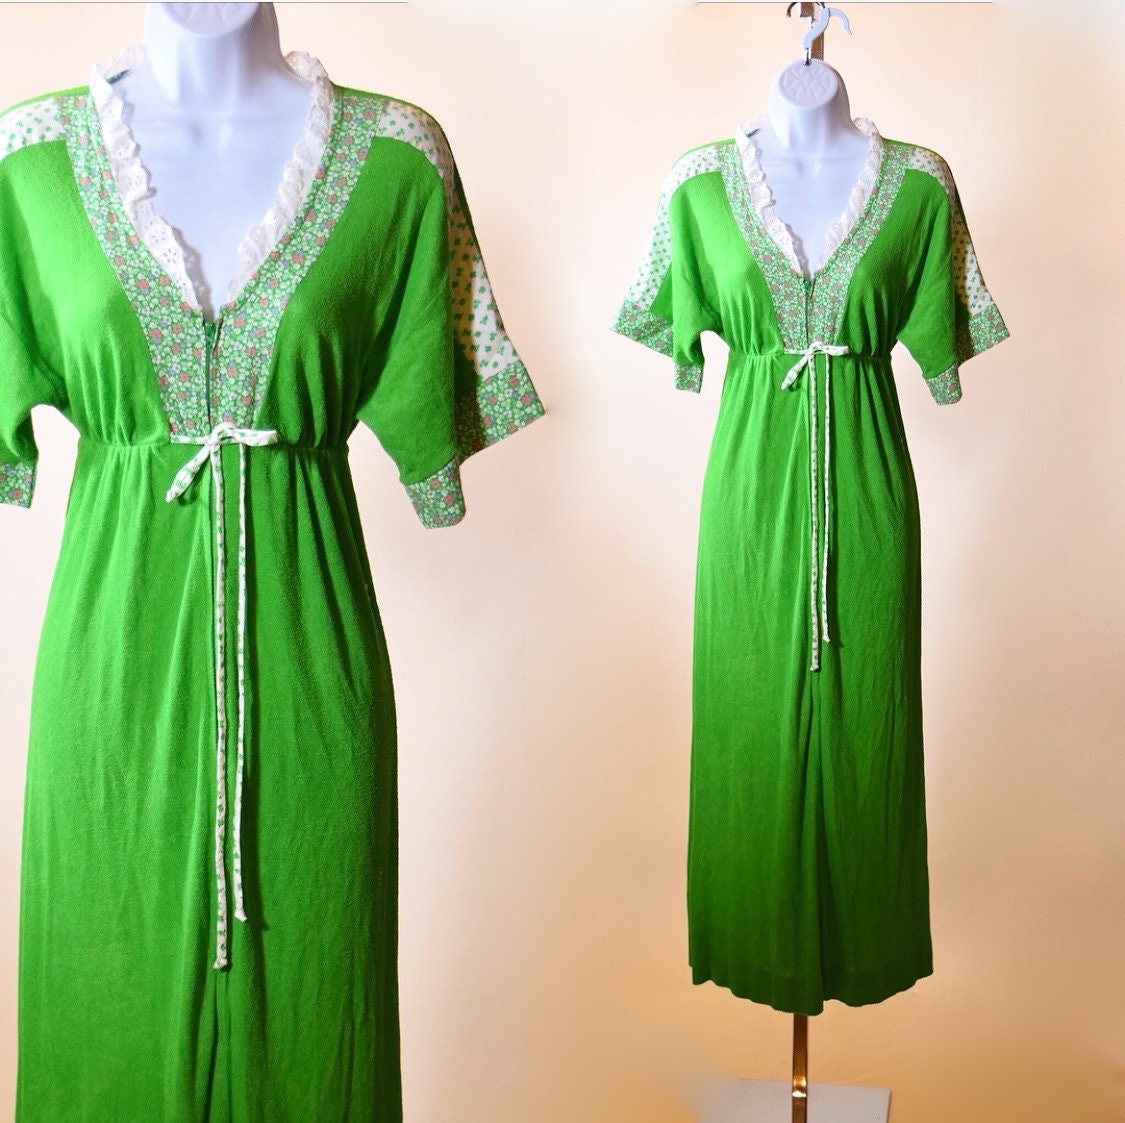 1970s vintage green terry cloth robe with floral and eyelet trim women